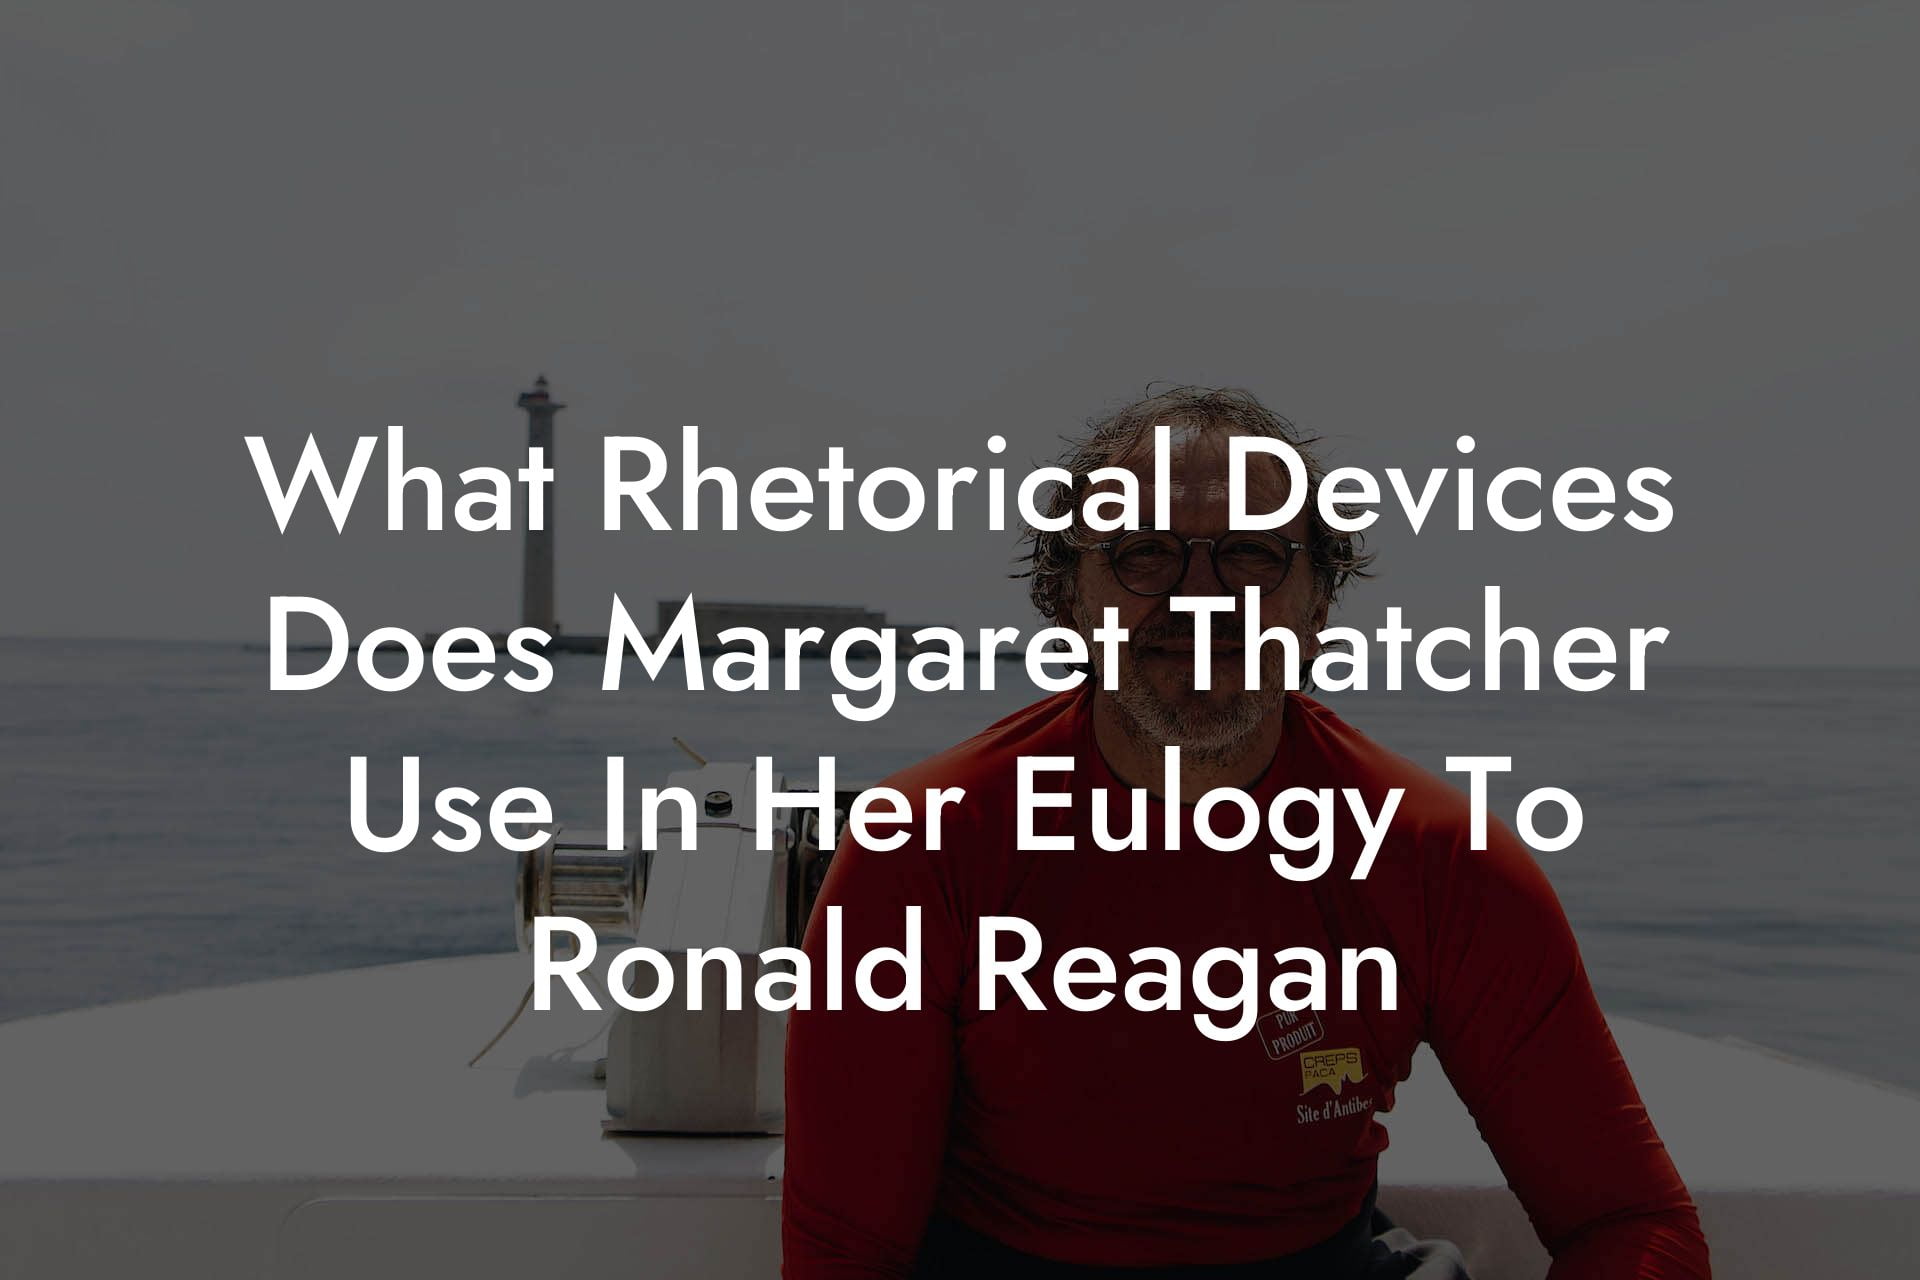 What Rhetorical Devices Does Margaret Thatcher Use In Her Eulogy To Ronald Reagan